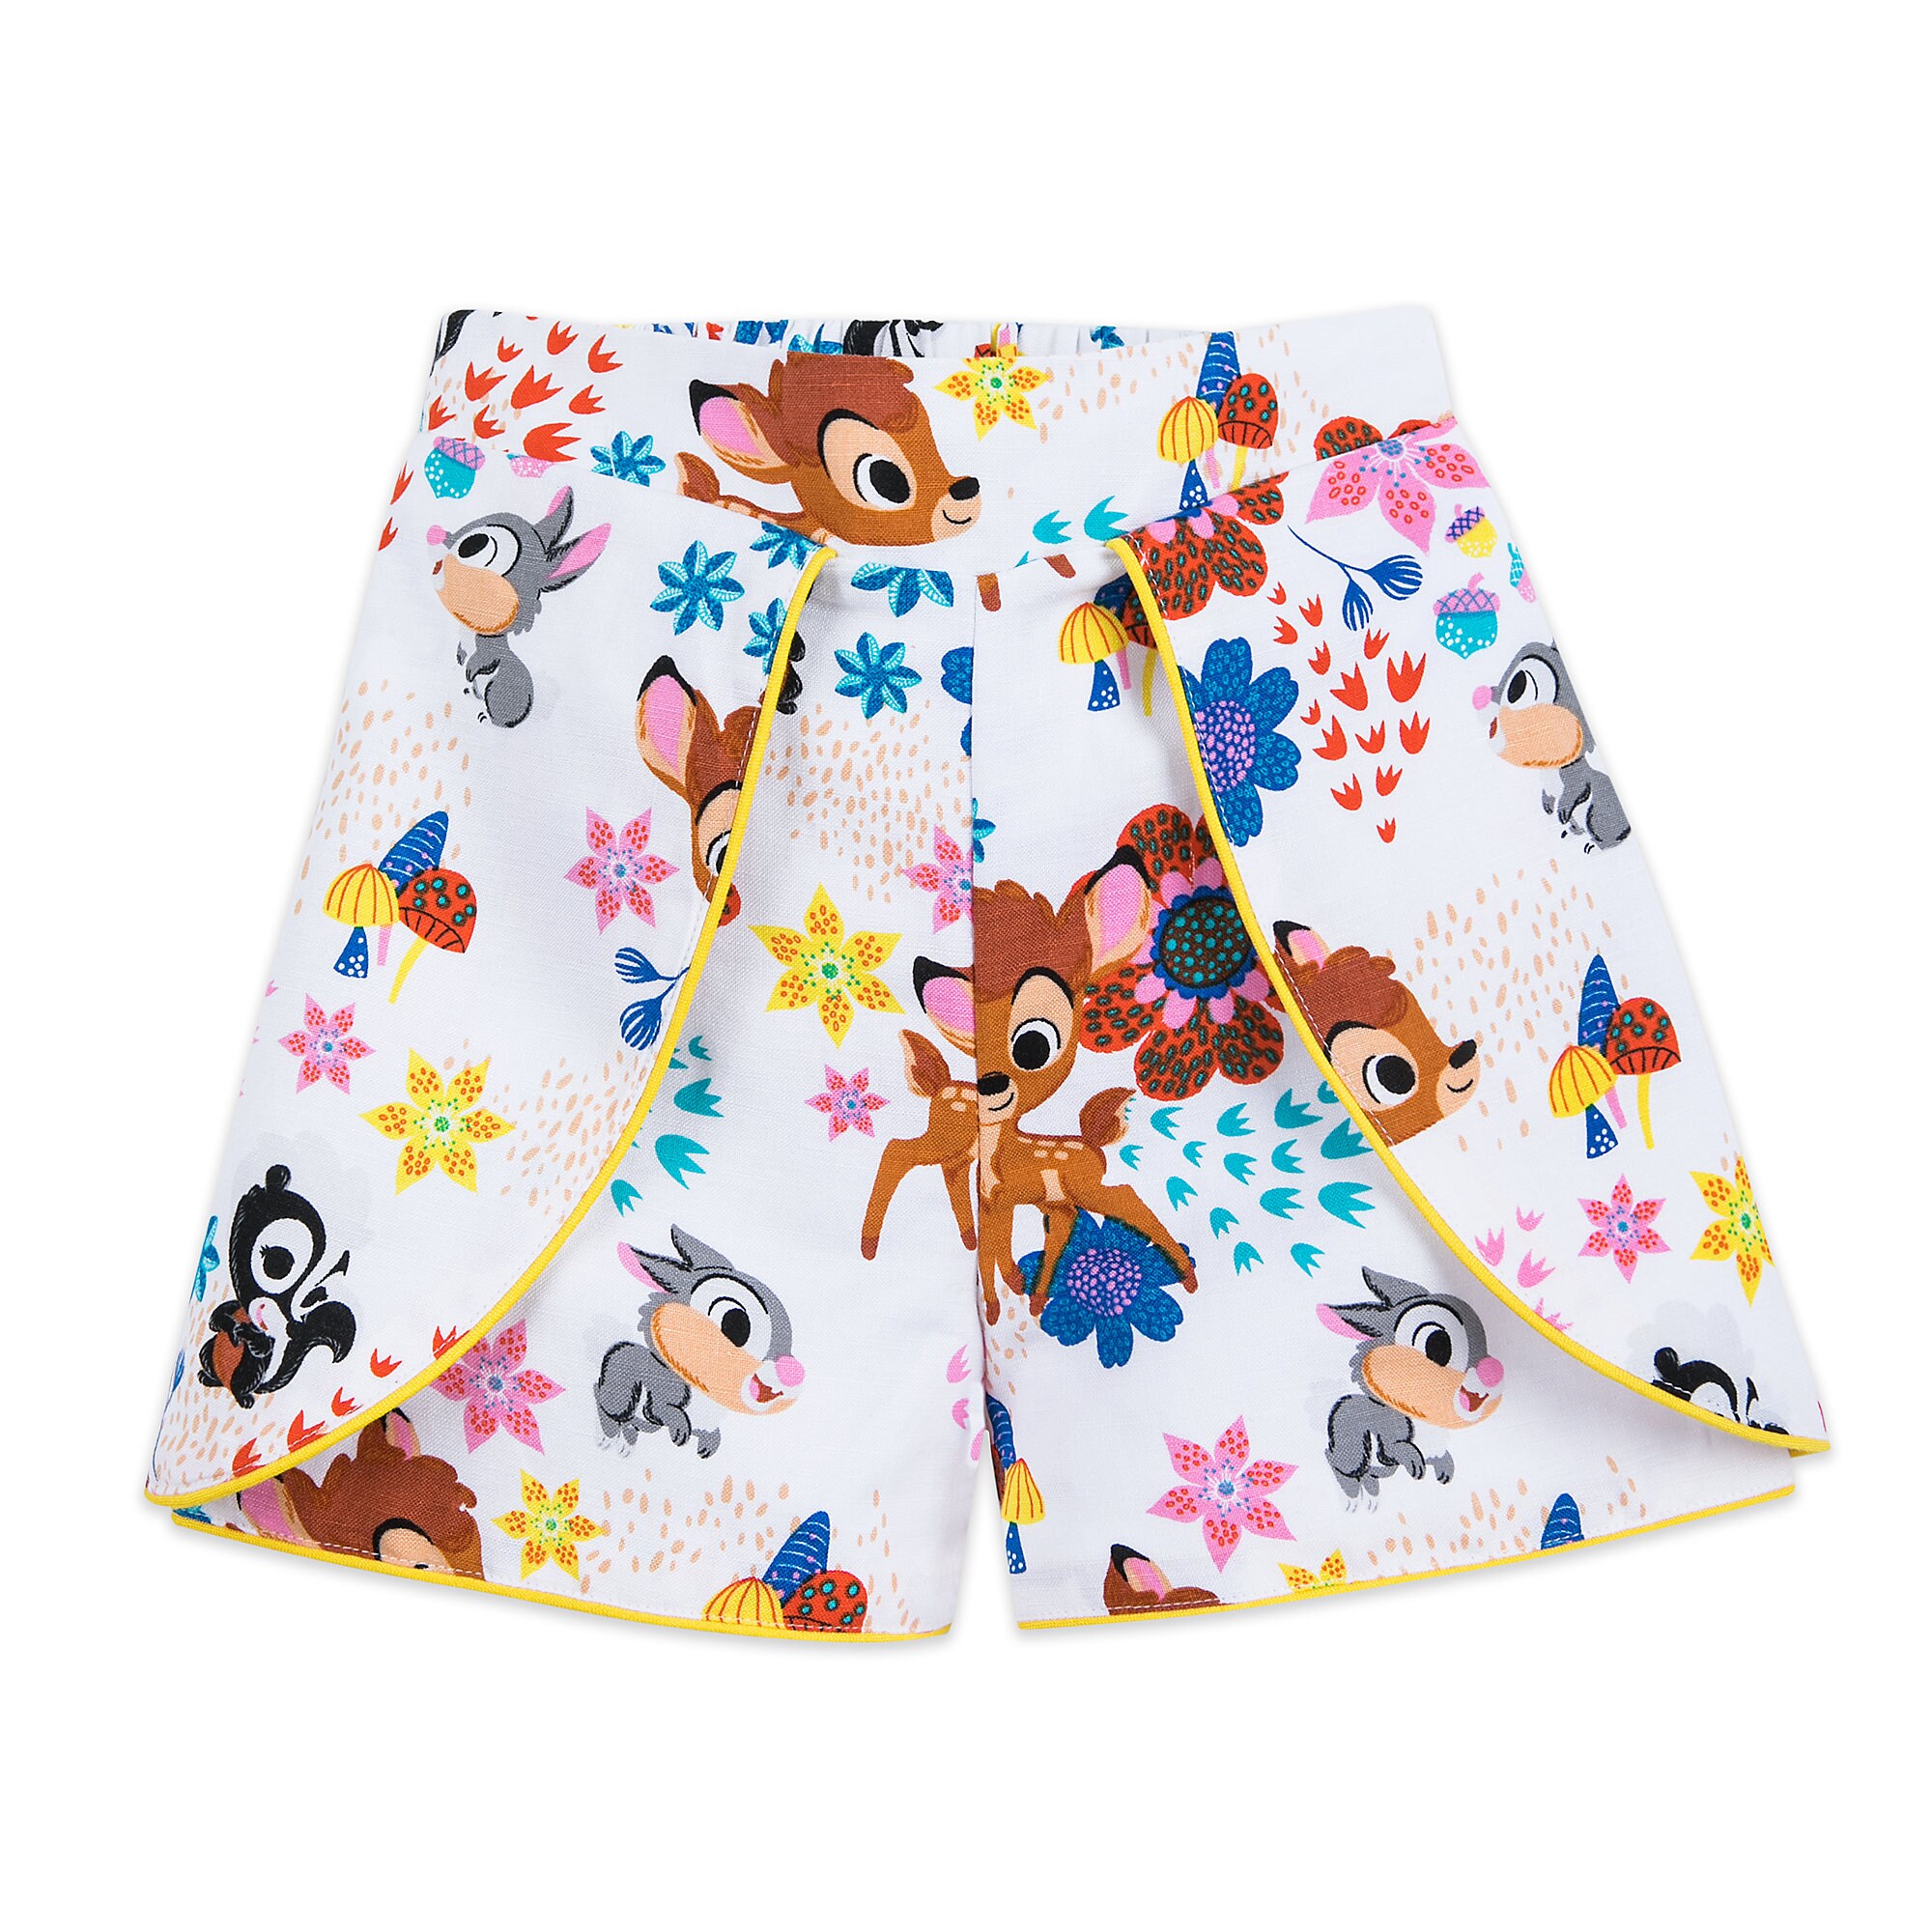 Bambi Top and Shorts Set for Girls - Disney Furrytale friends is here ...